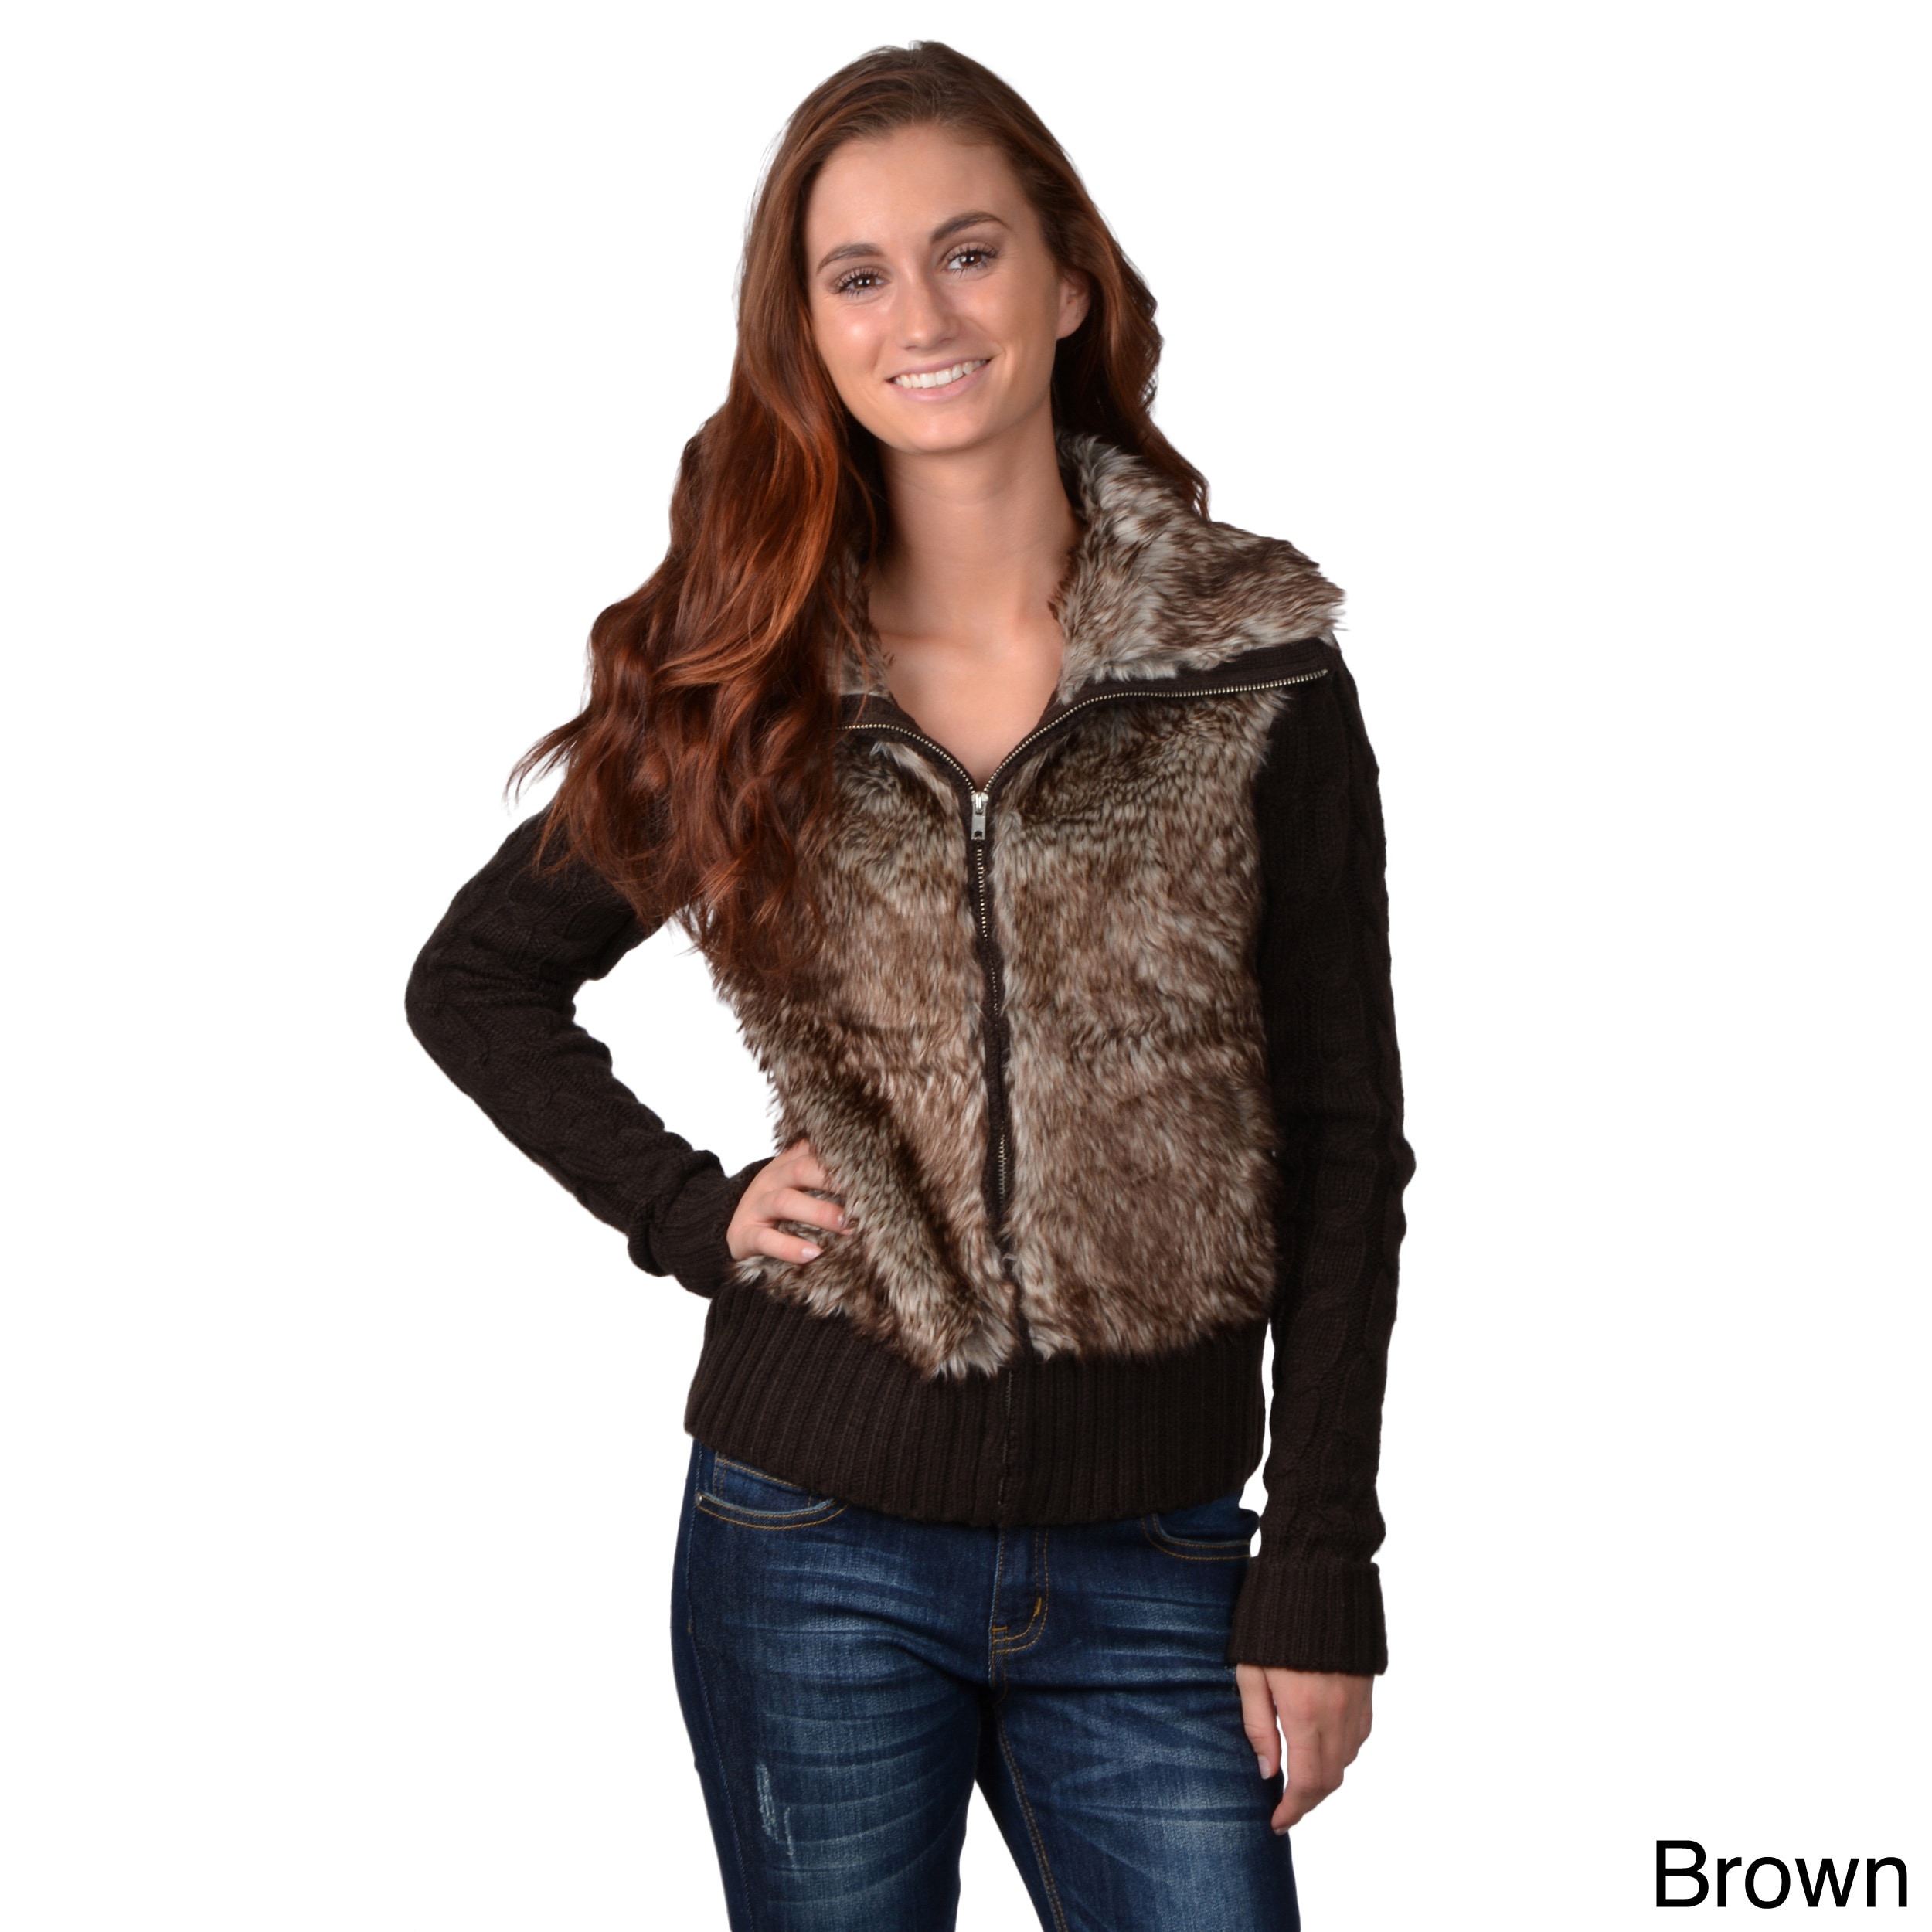 Journee Collection Journee Collection Juniors Faux Fur Zip up Sweater Brown Size S (1  3)